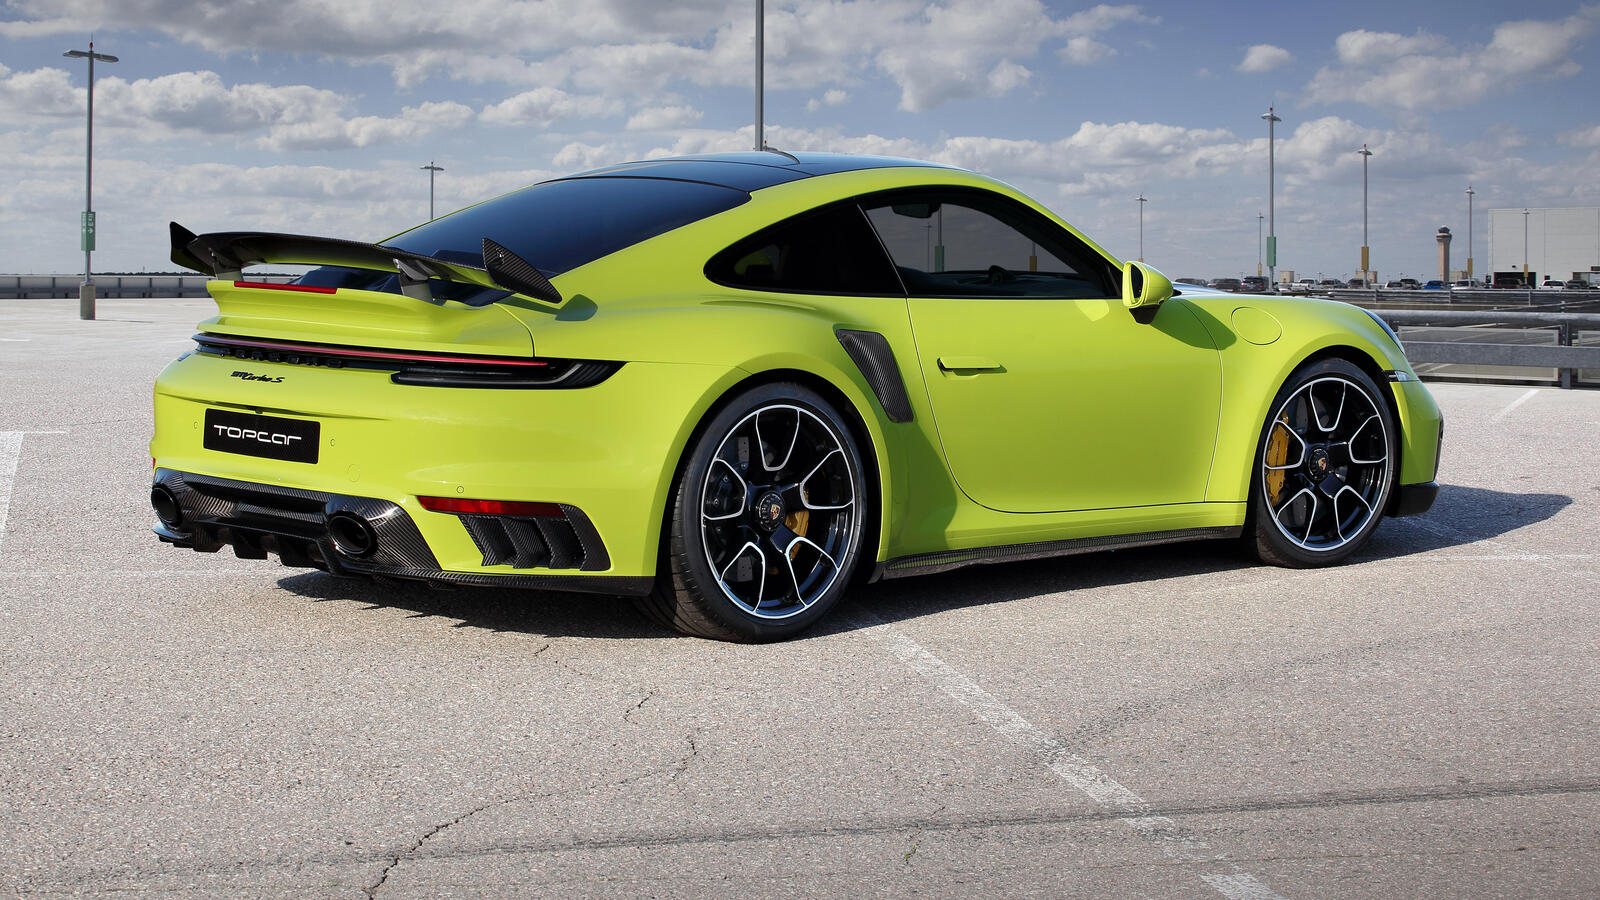 Free photo 2022 saloon colored porsche 911 turbo s stinger with rear view